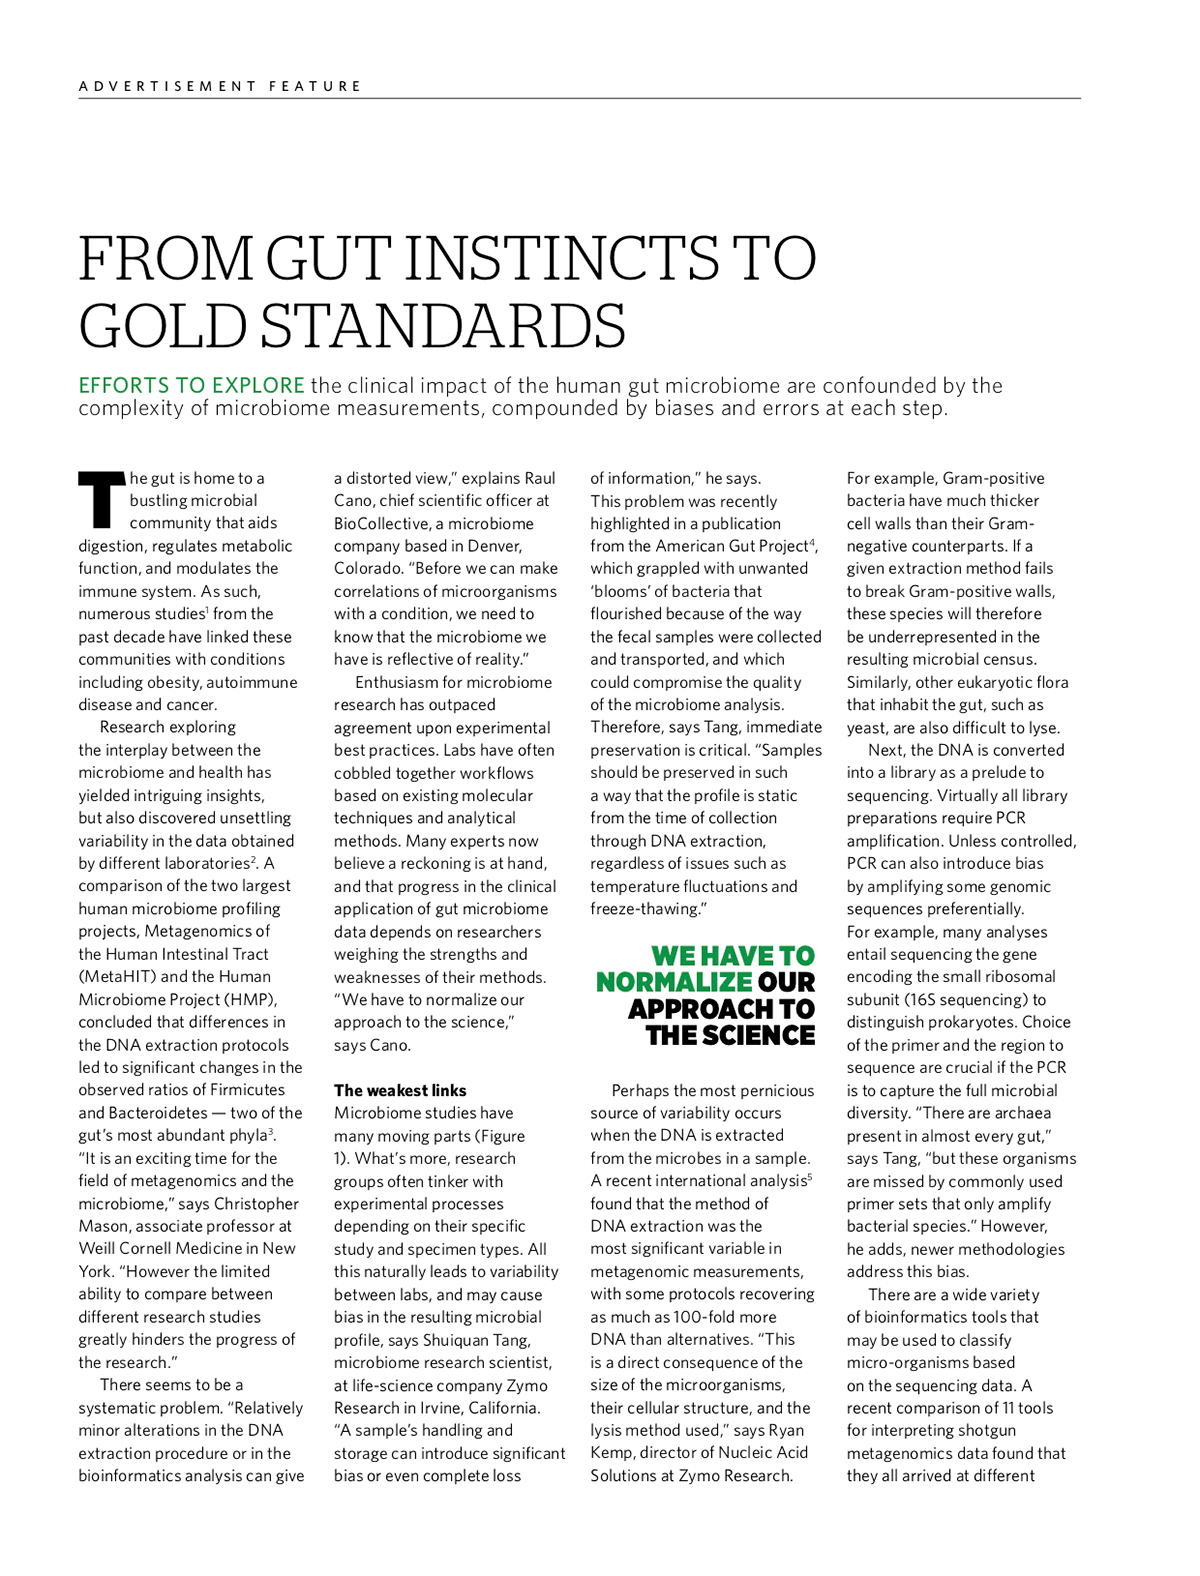 First page of article from gut instincts to gold standards